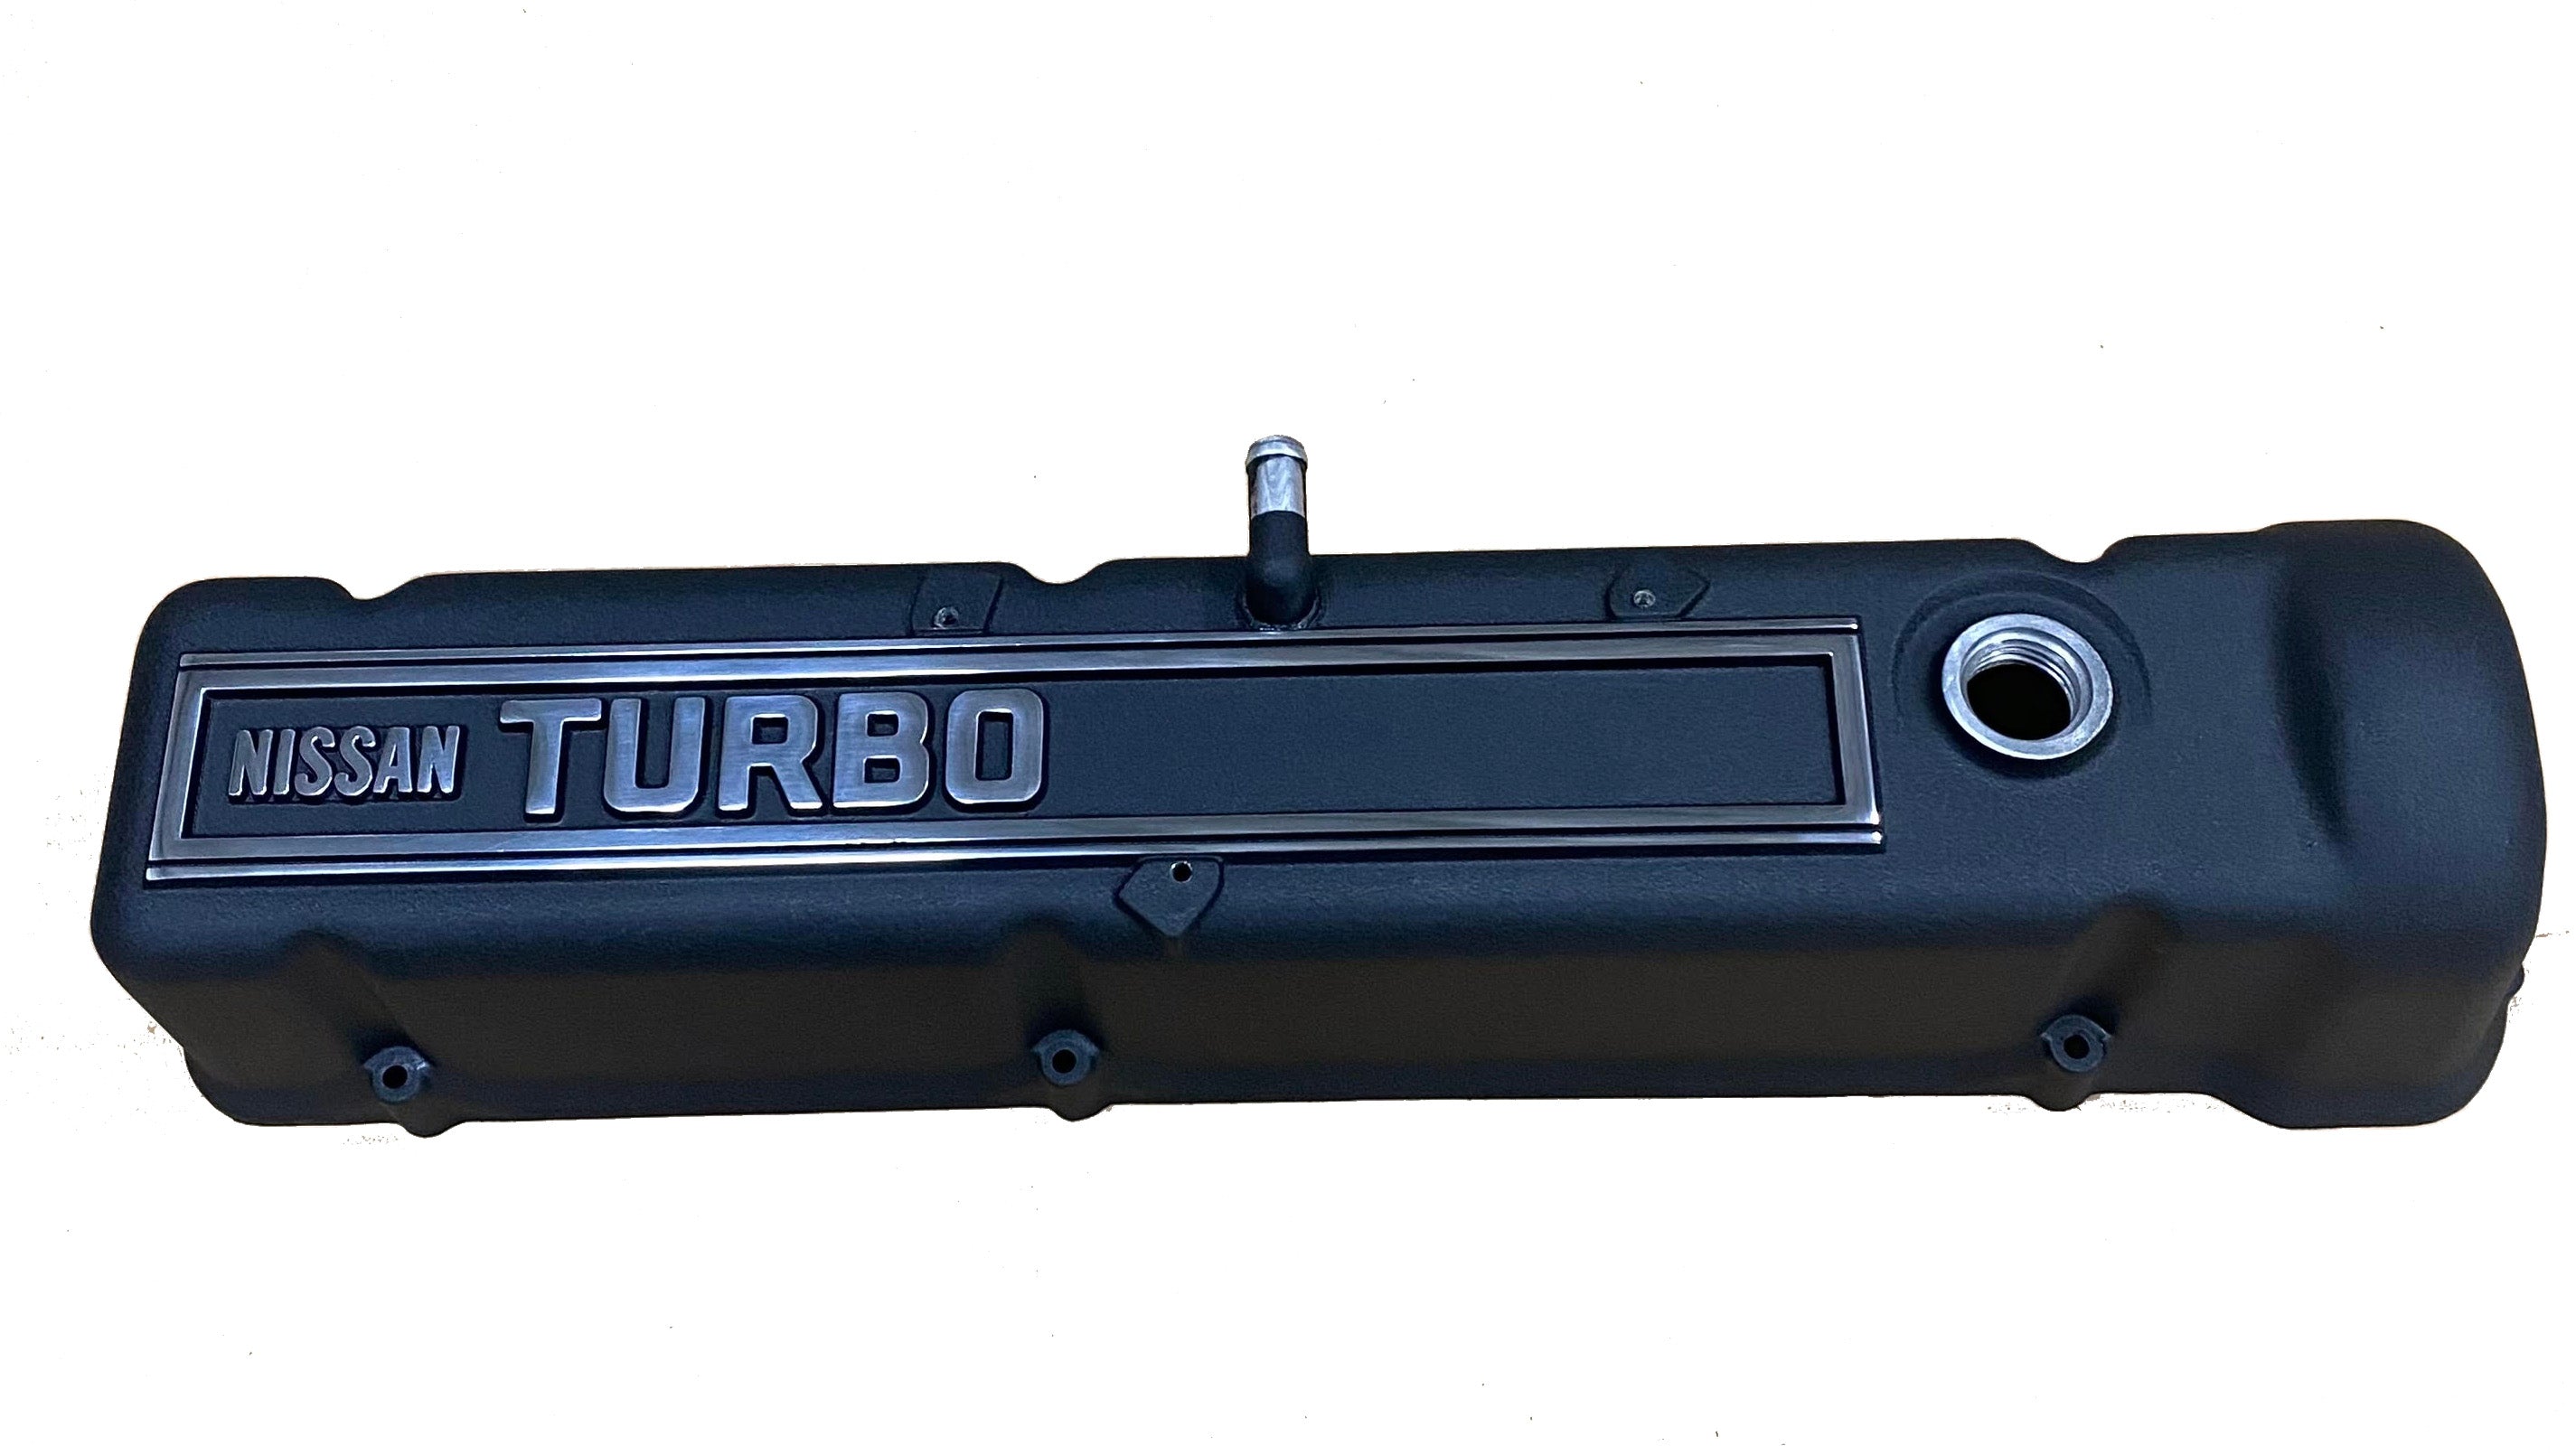 Inline 6 "TURBO" Valve Cover (Powder Coated in Black Wrinkle with Polished Lettering)